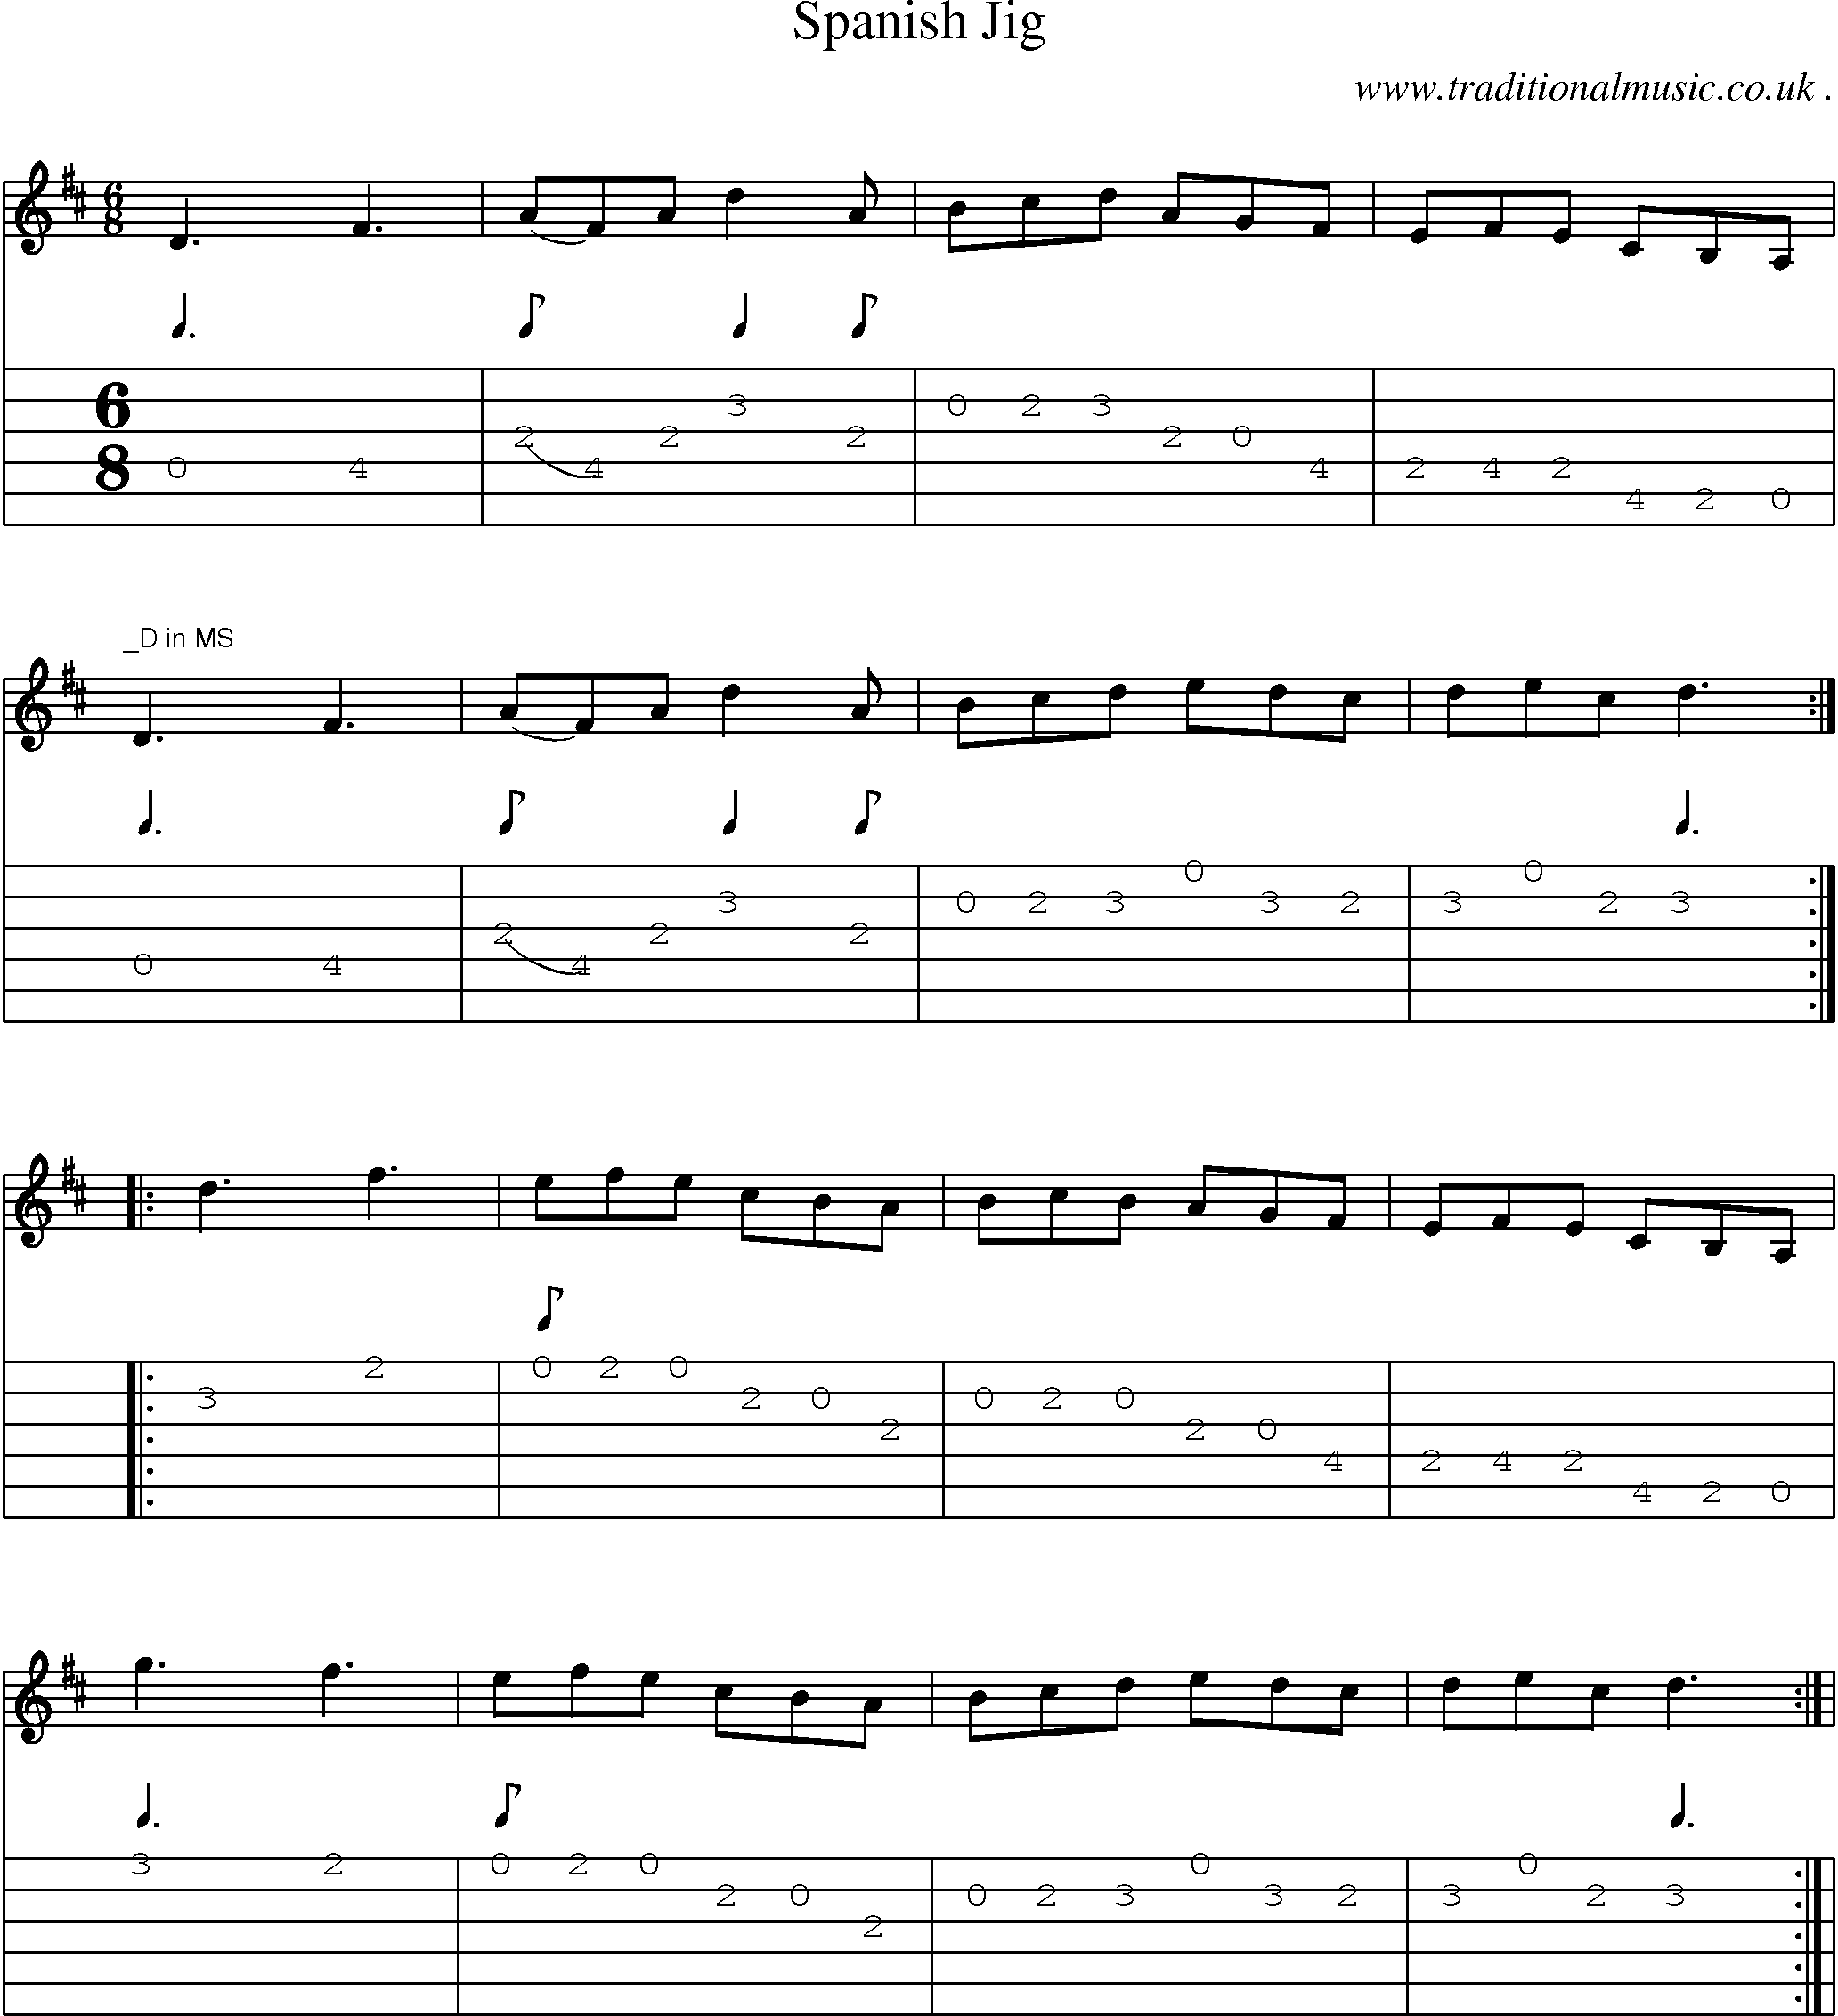 Sheet-Music and Guitar Tabs for Spanish Jig